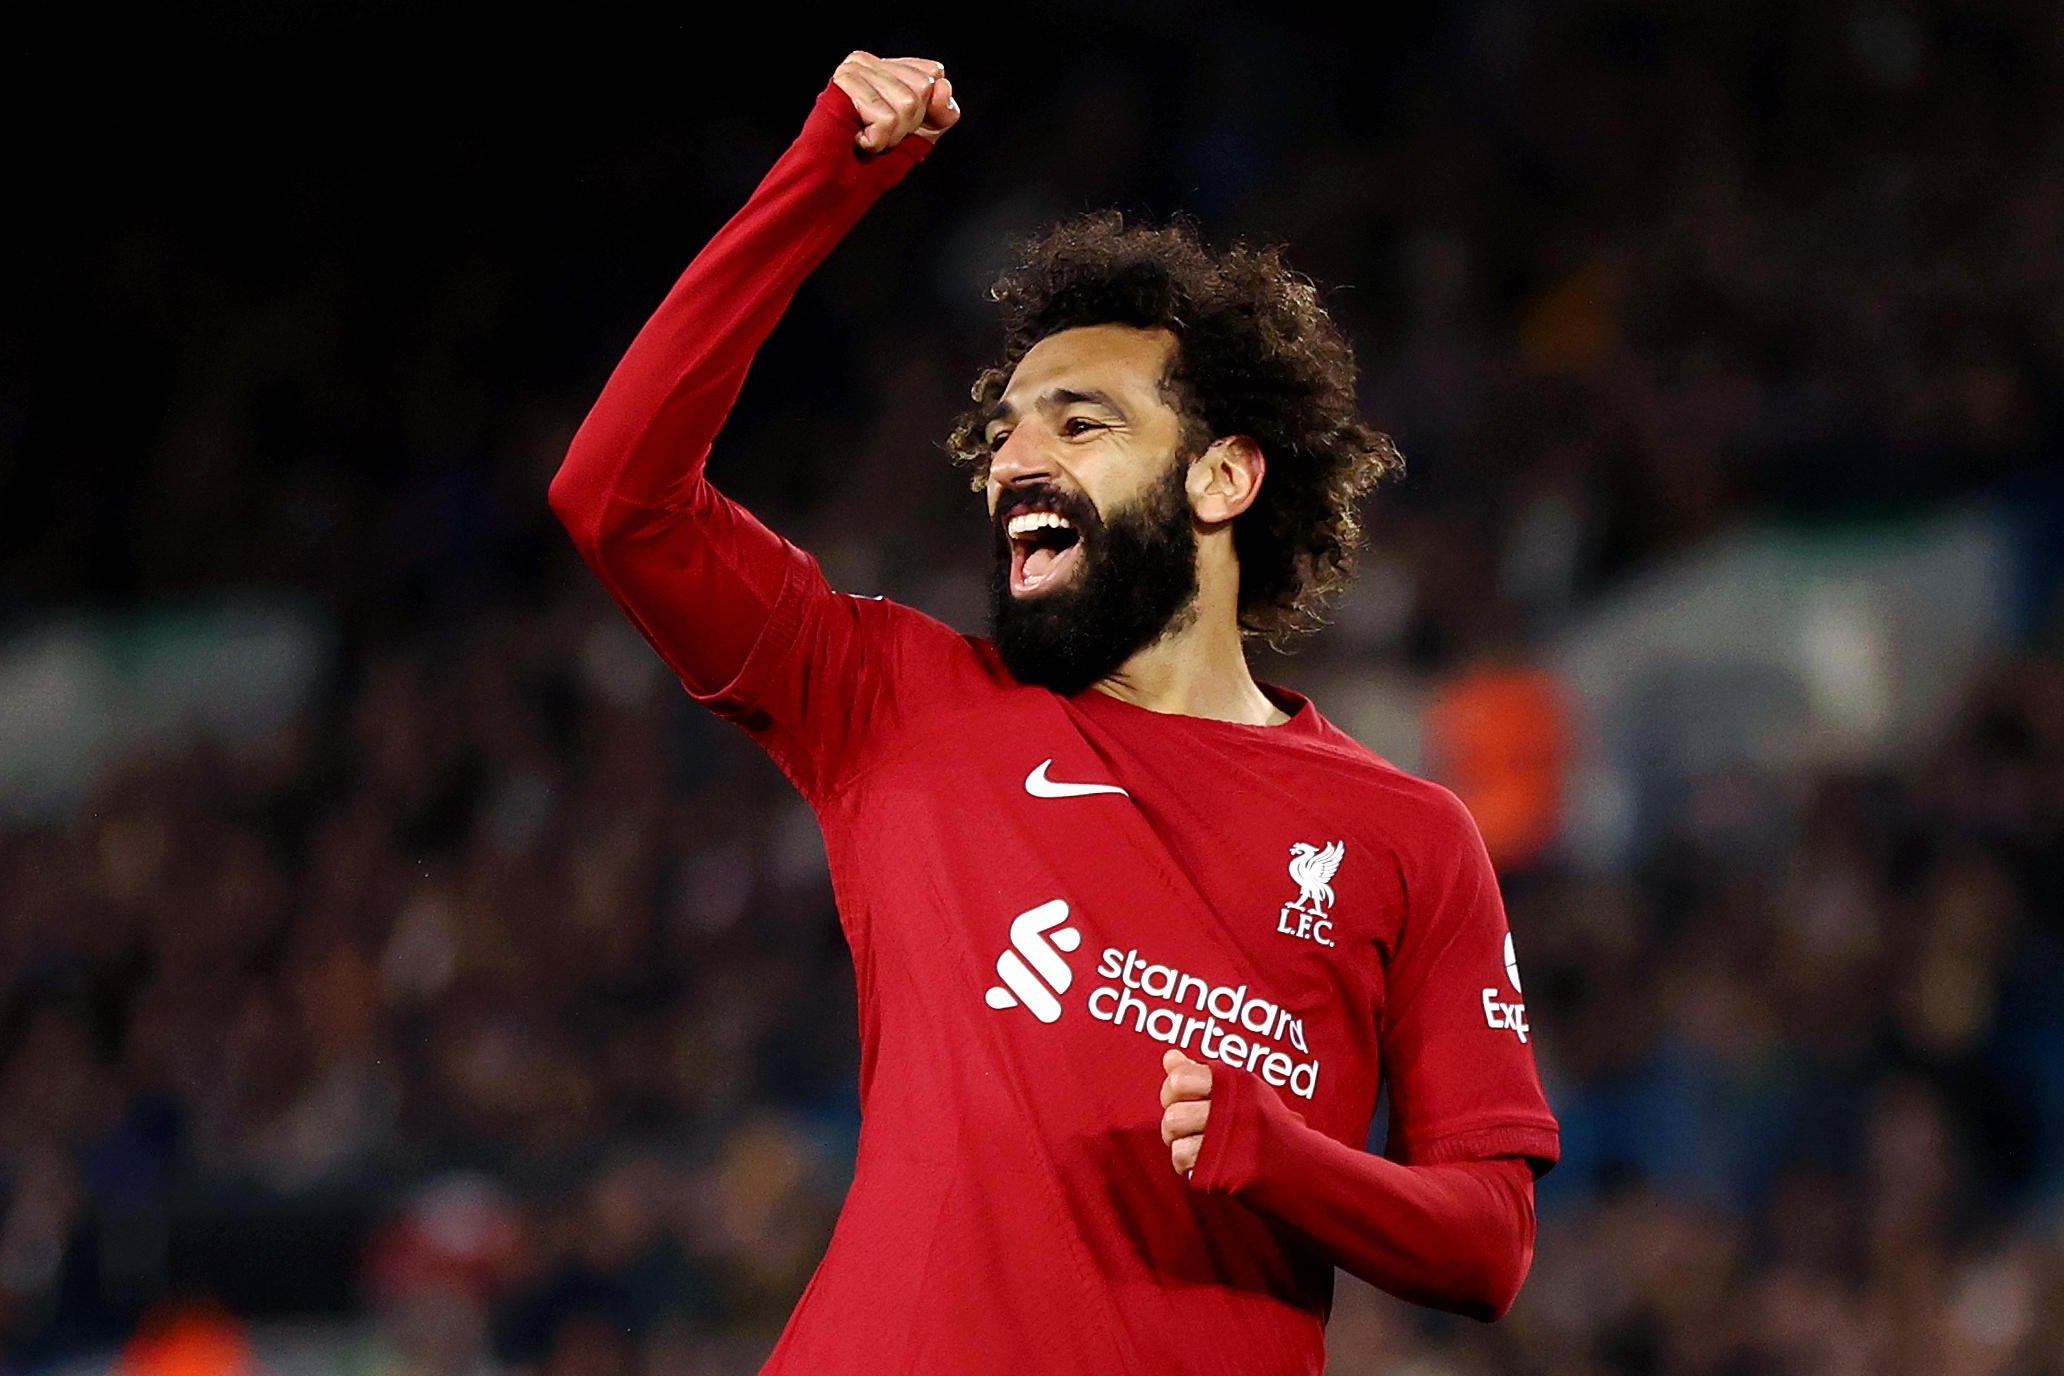 LEEDS, ENGLAND - APRIL 17: Mo Salah of Liverpool celebrates after scoring his teams fourth goal during the Premier League match between Leeds United and Liverpool FC at Elland Road on April 17, 2023 in Leeds, England. (Photo by Naomi Baker/Getty Images)